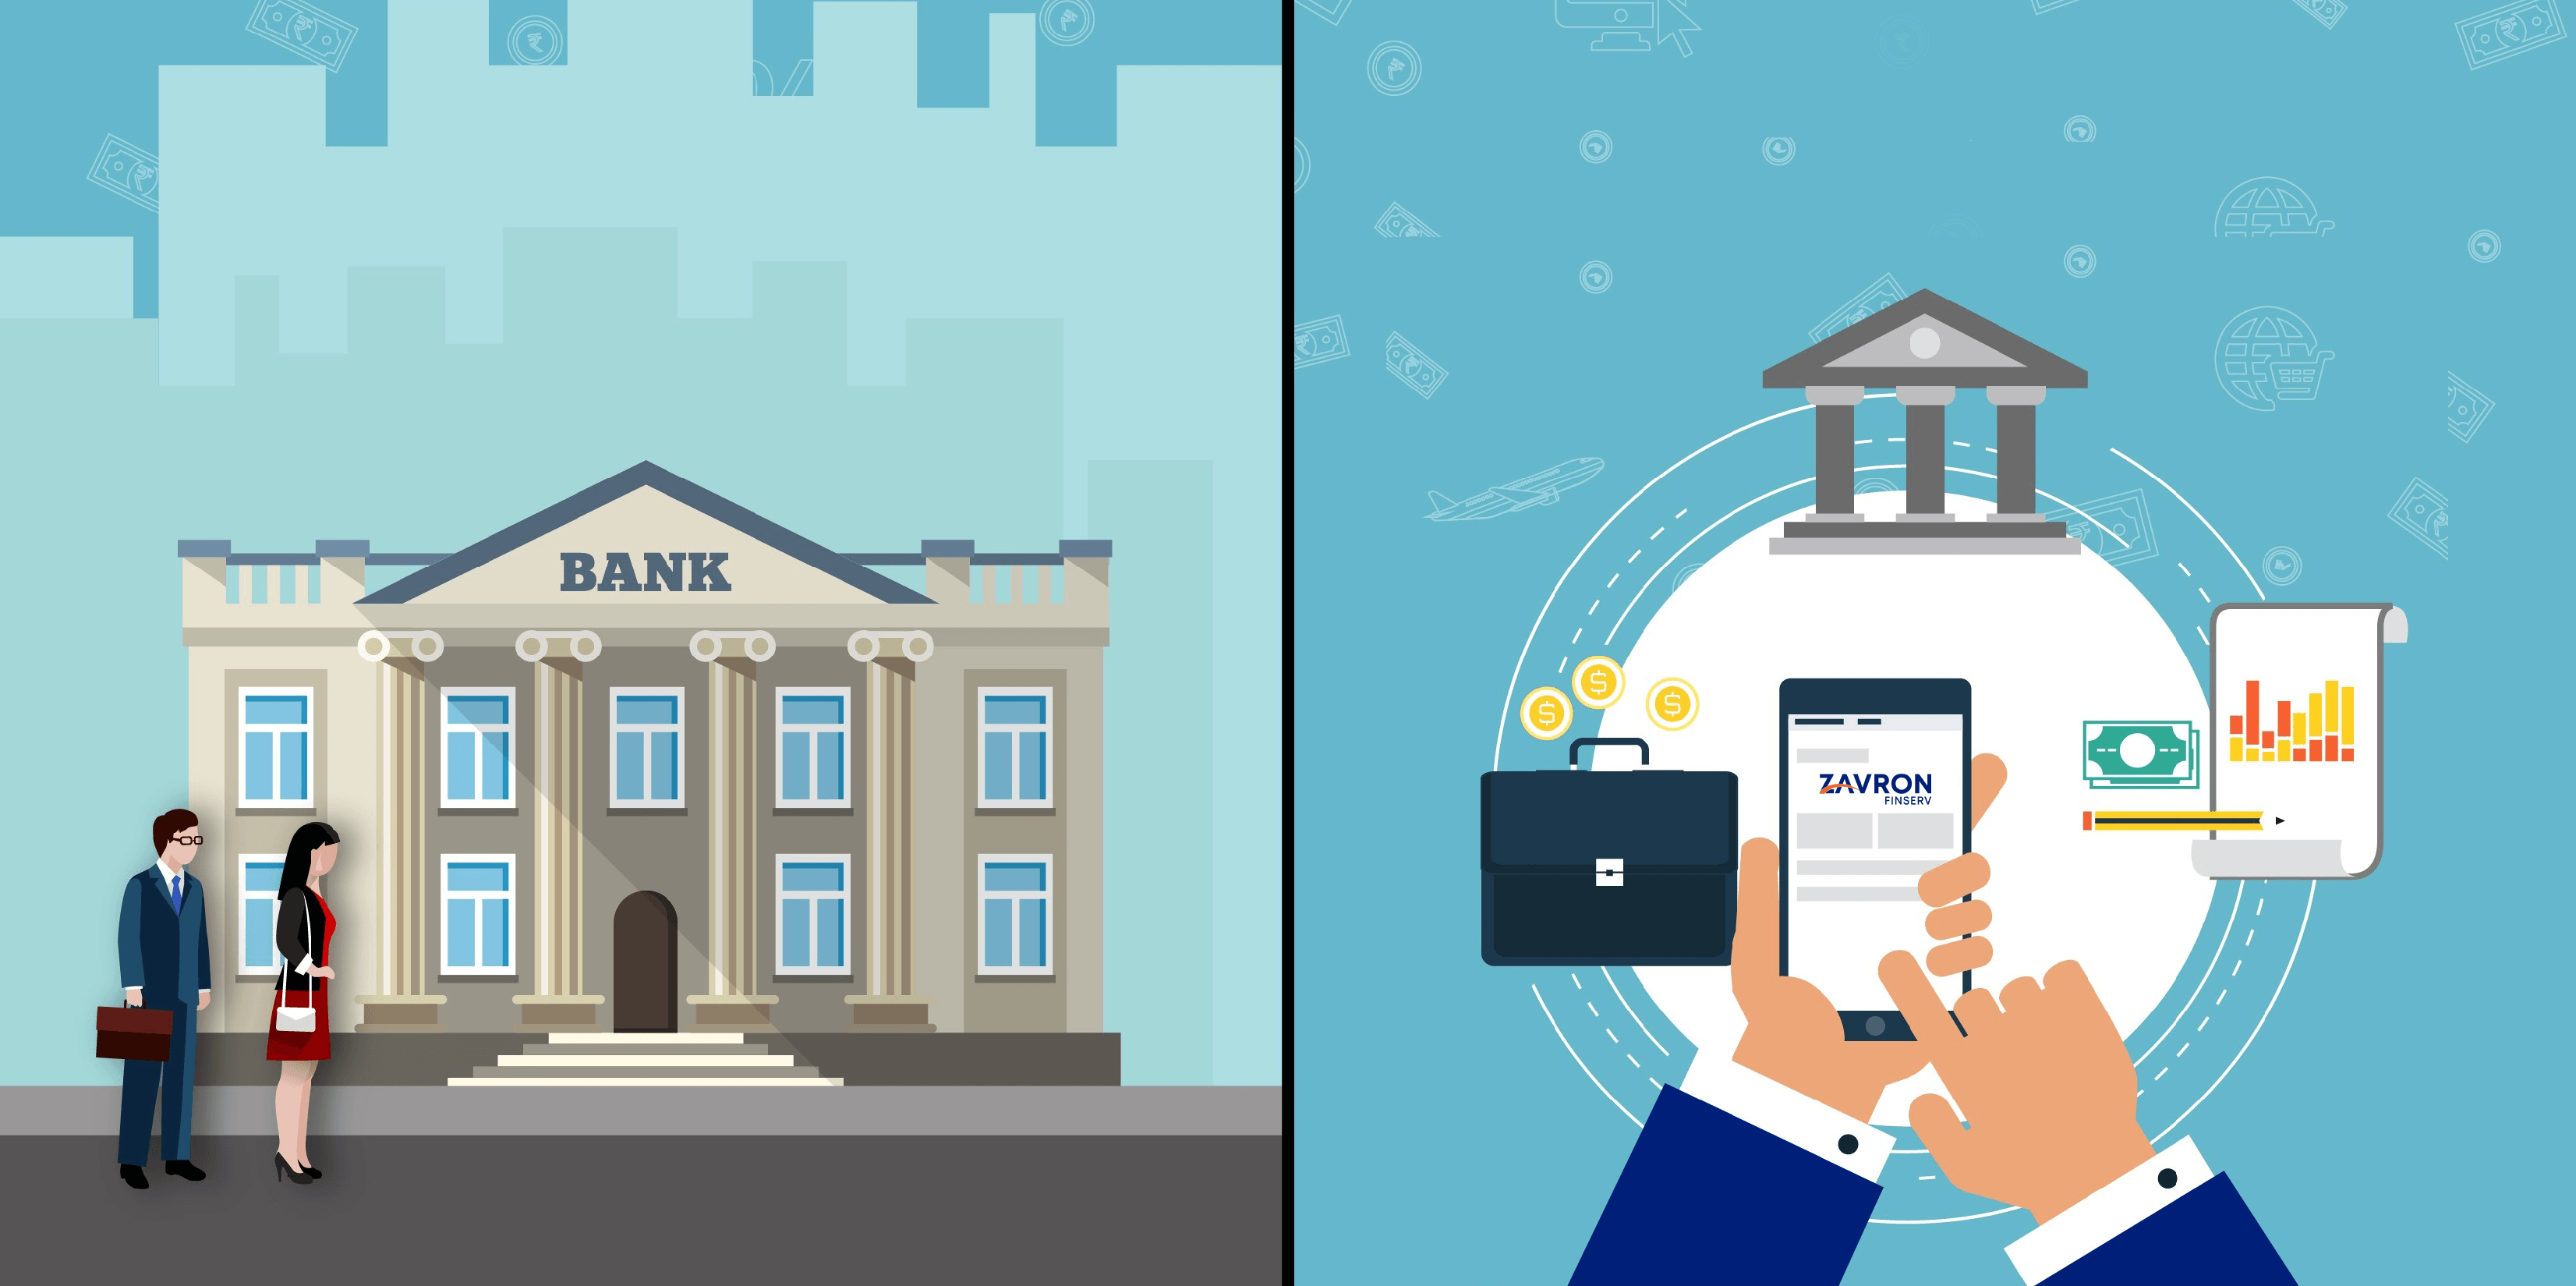 How Is Fintech Different from Banks?